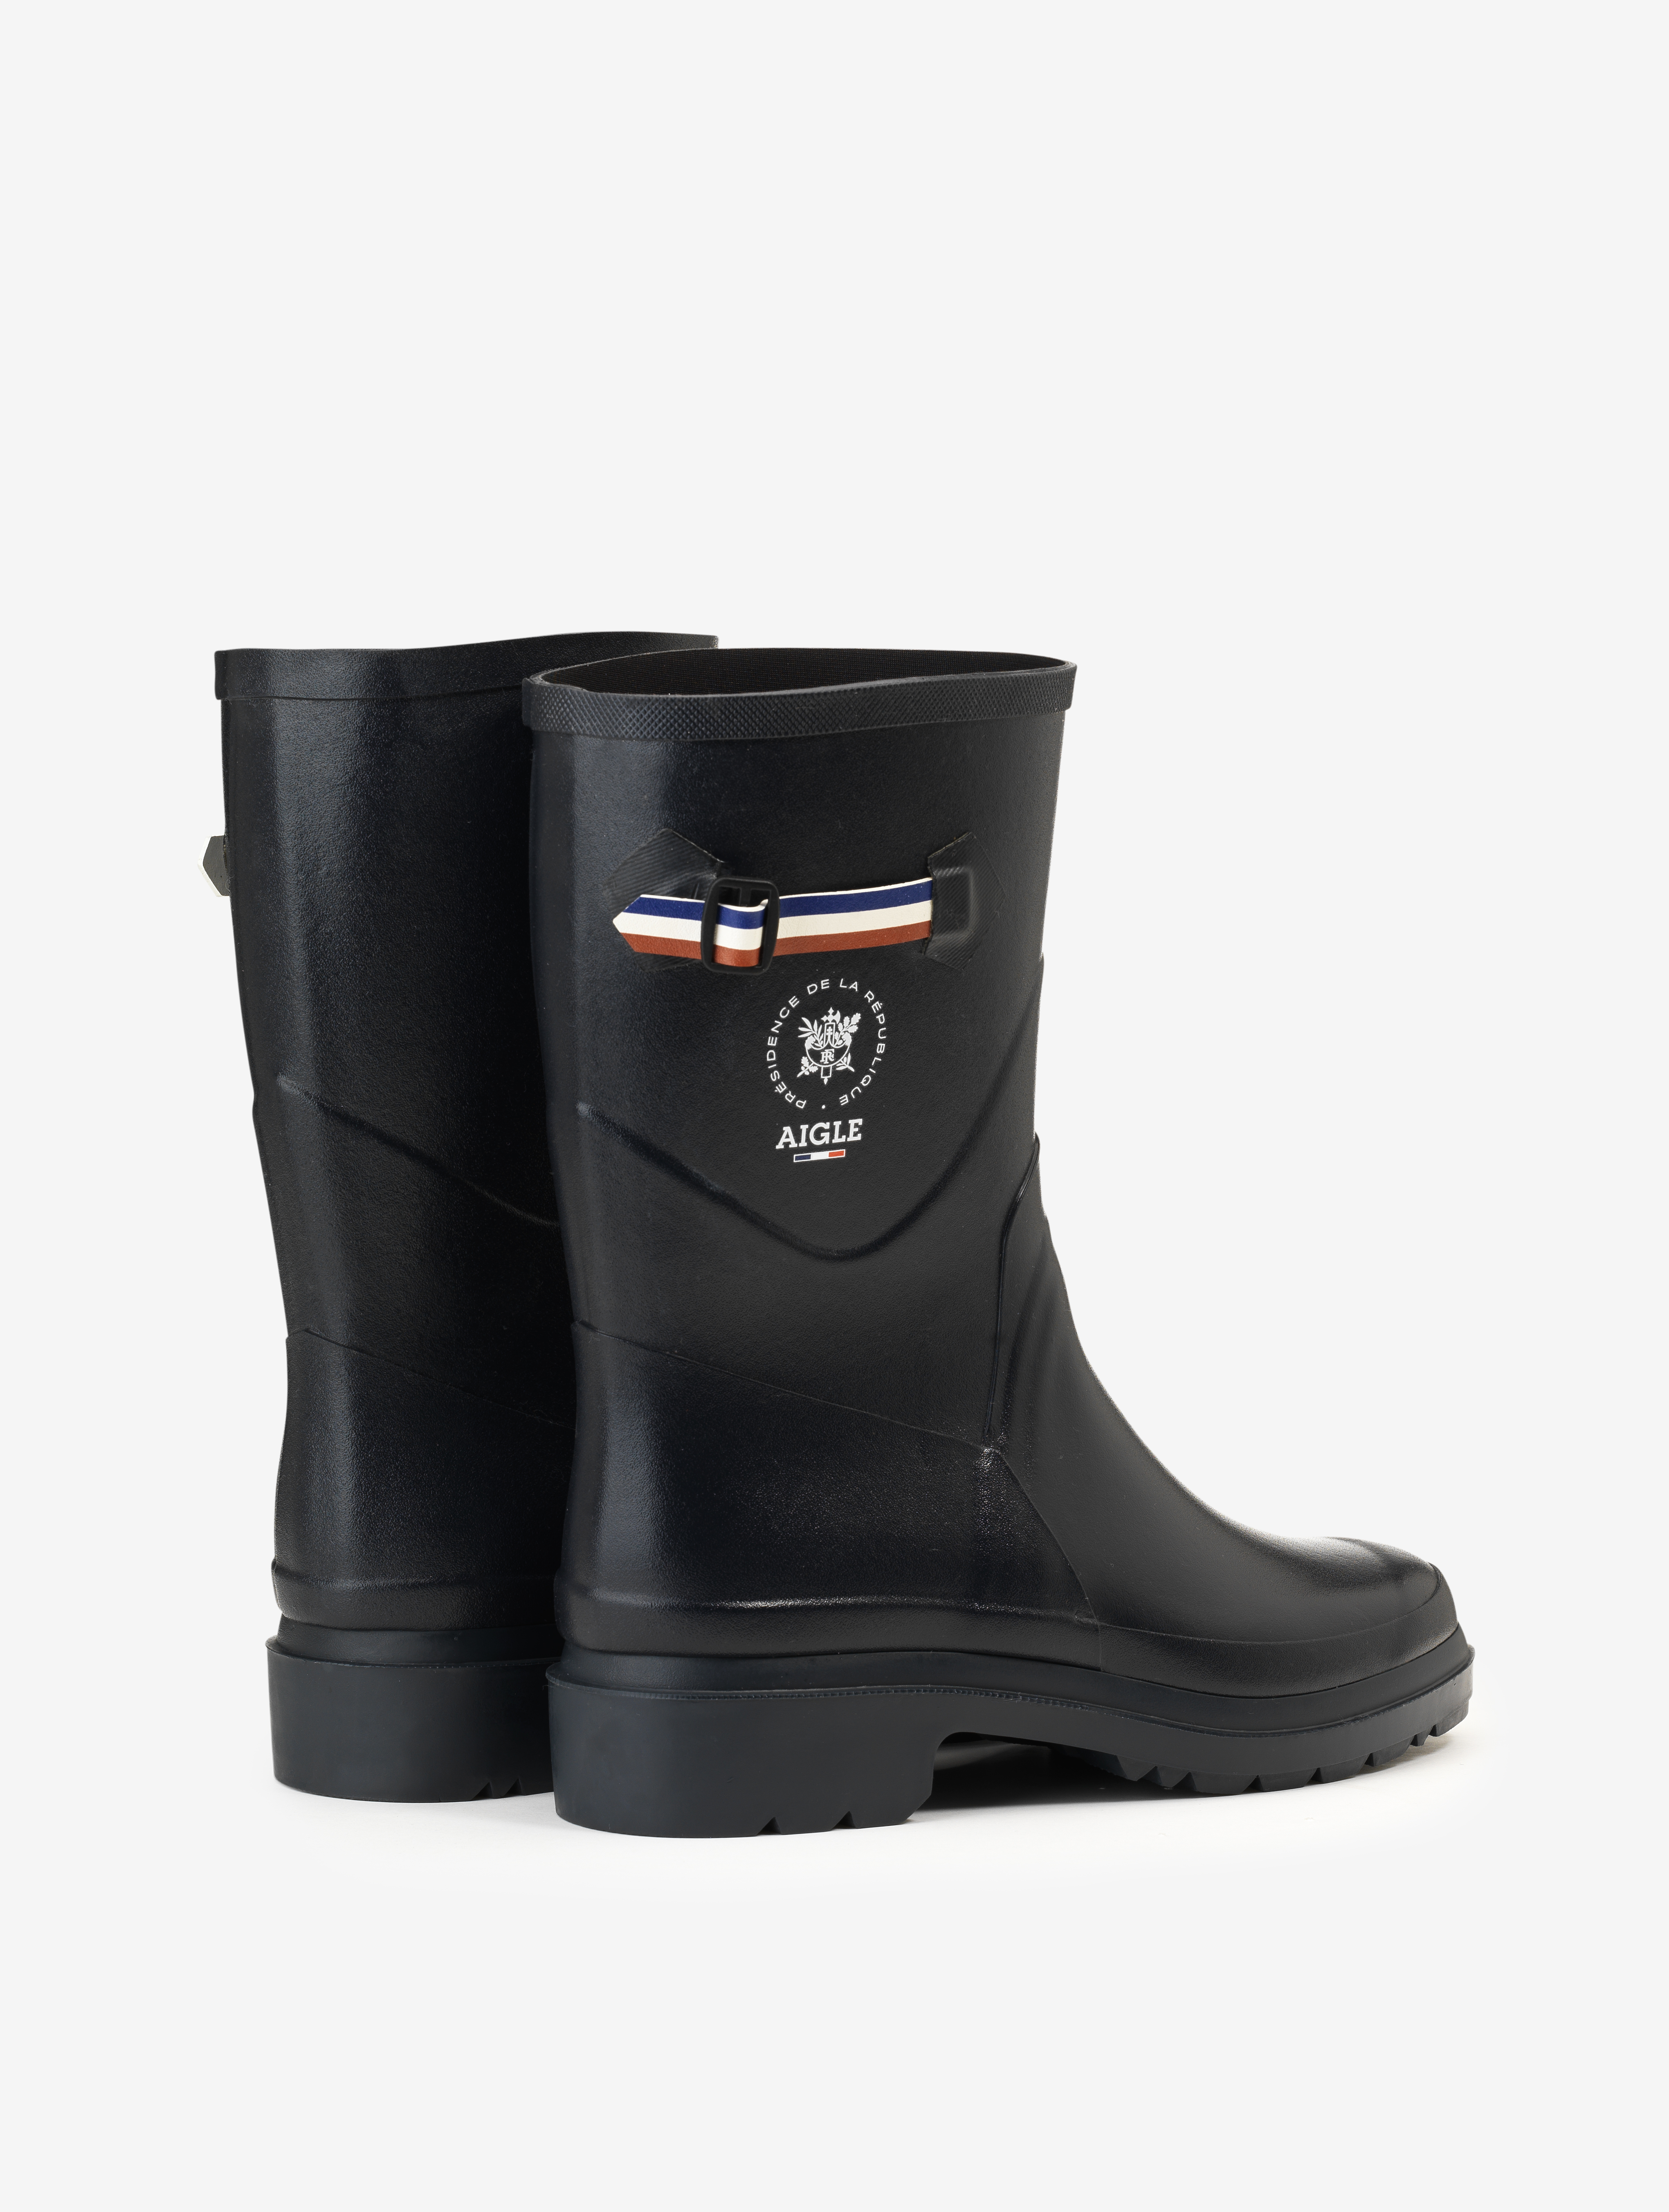 Krage verden Bloodstained Aigle - Boots Aigle x Elysée, Made in France Marine - Elysee boots mmen |  AIGLE